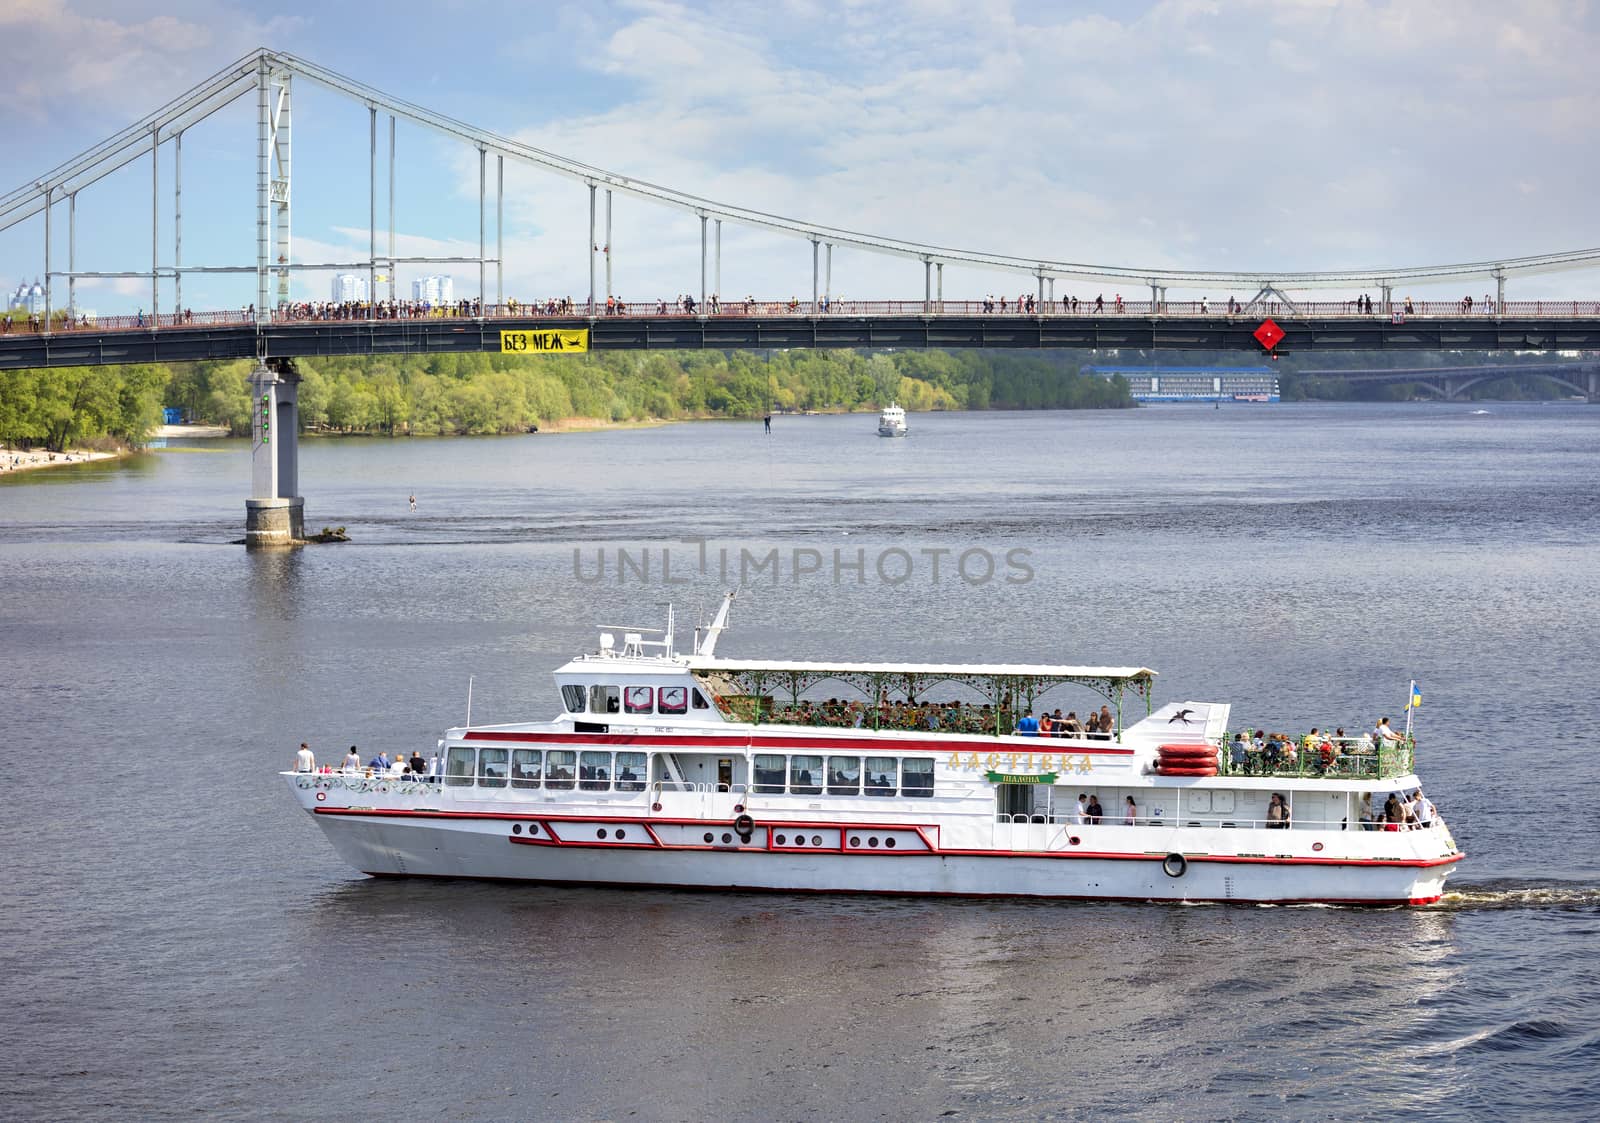 A white promenade boat carries people across the Dnieper in a bright sunny day by Sergii